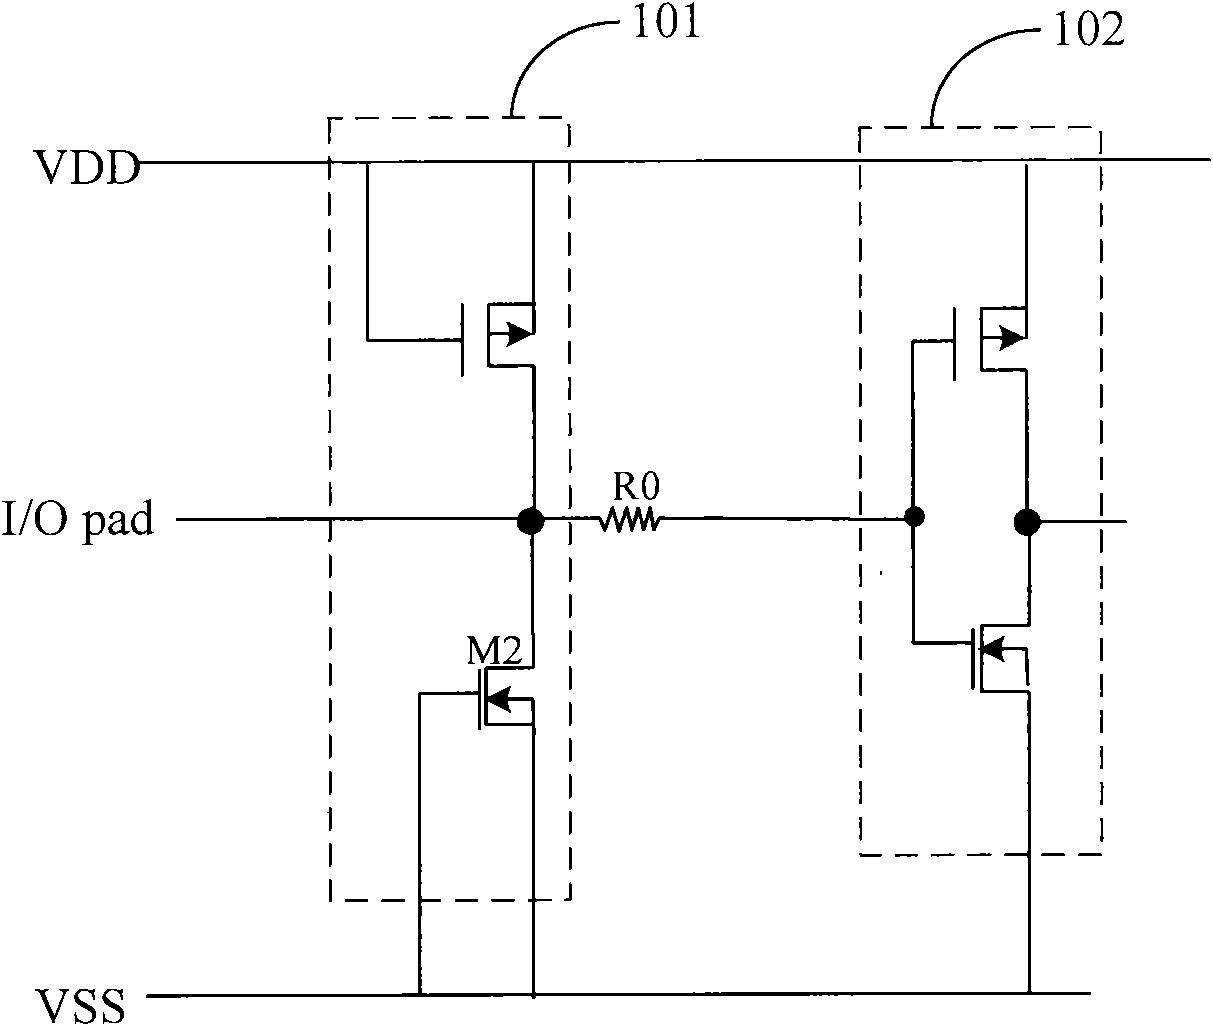 CDM (Charged Device Model) ESD (Electro-Static Discharge) protection circuit